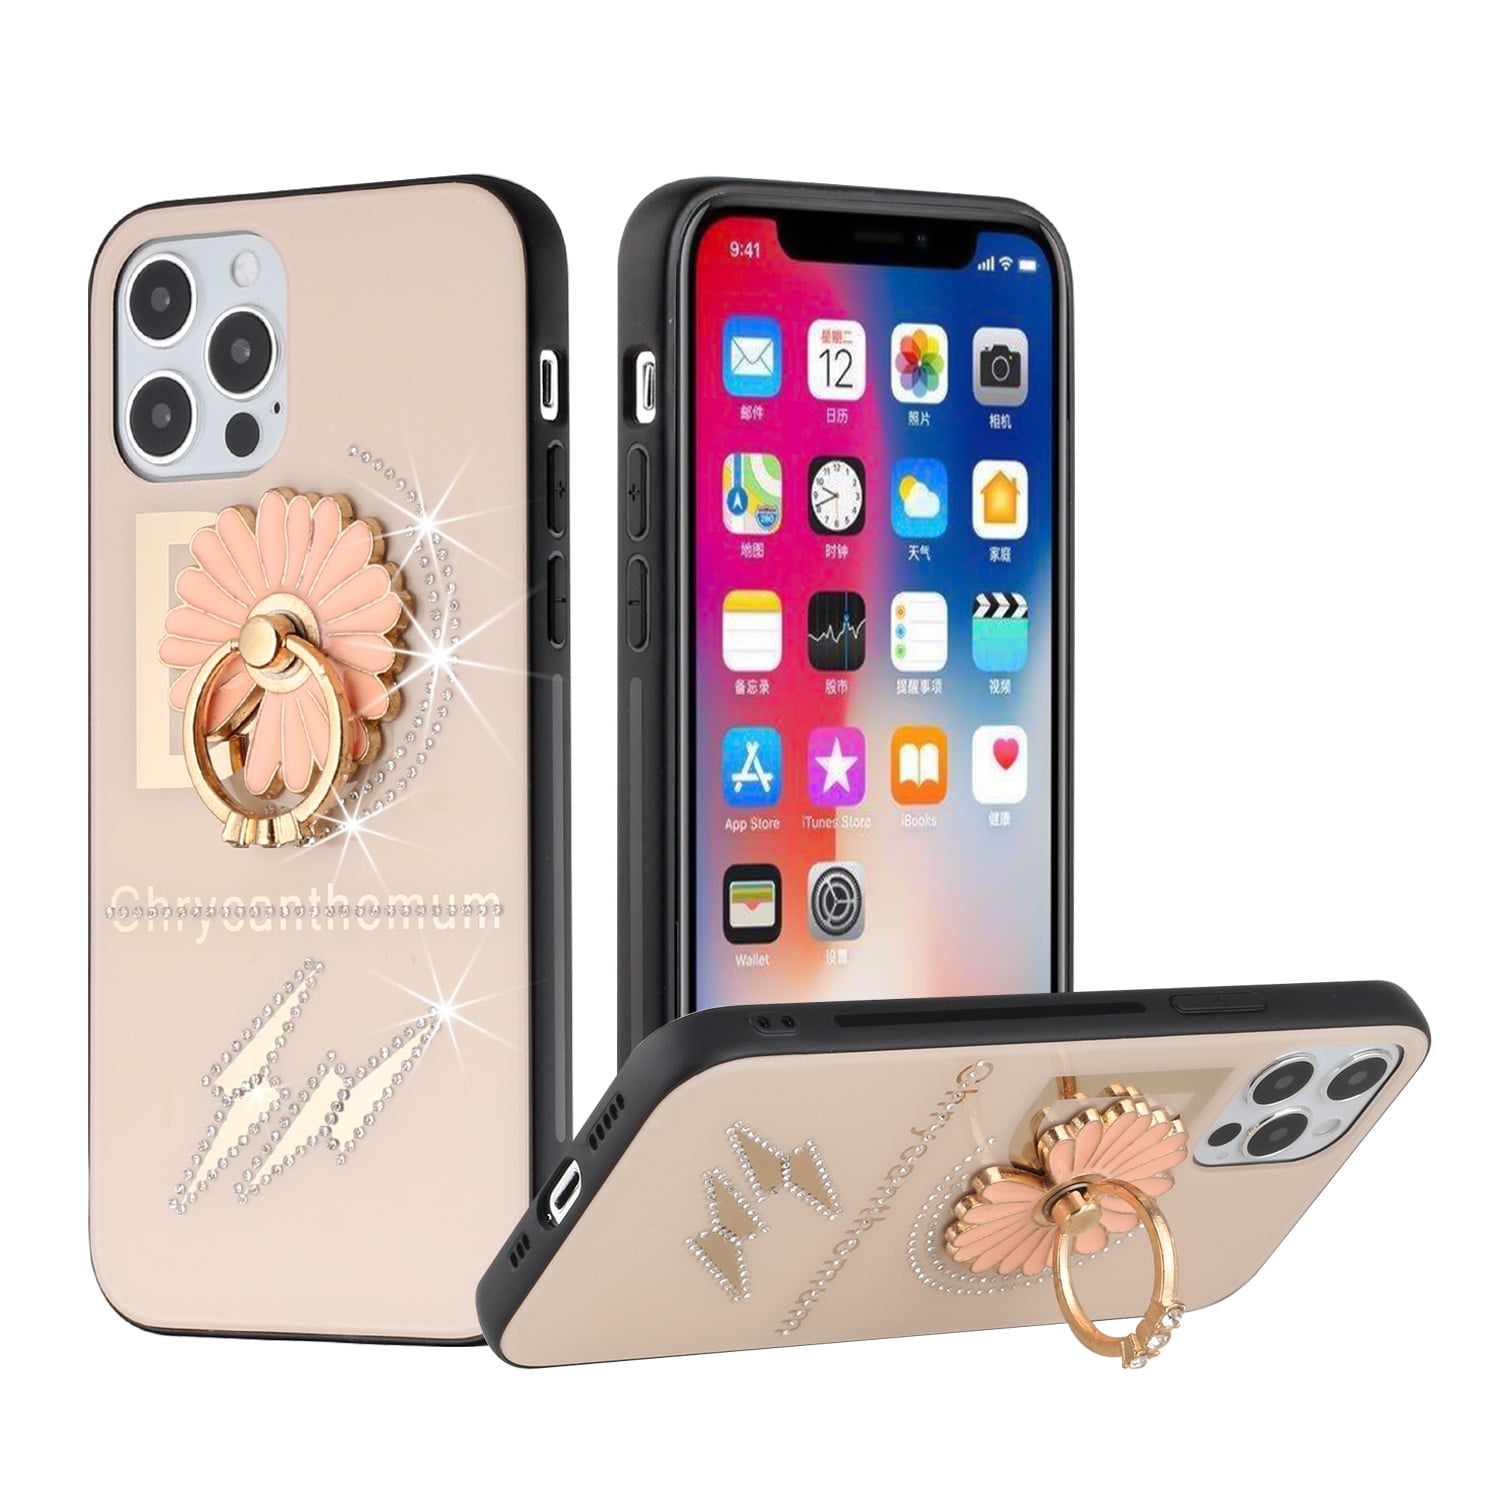 For Samsung Galaxy A23 5G Design Pattern Wallet Case 3D Diamond Bling  Buckle with Credit Card Slot & Stand Pouch Flip Cover ,Xpm Phone Case [  Summer Roses Flower ] 